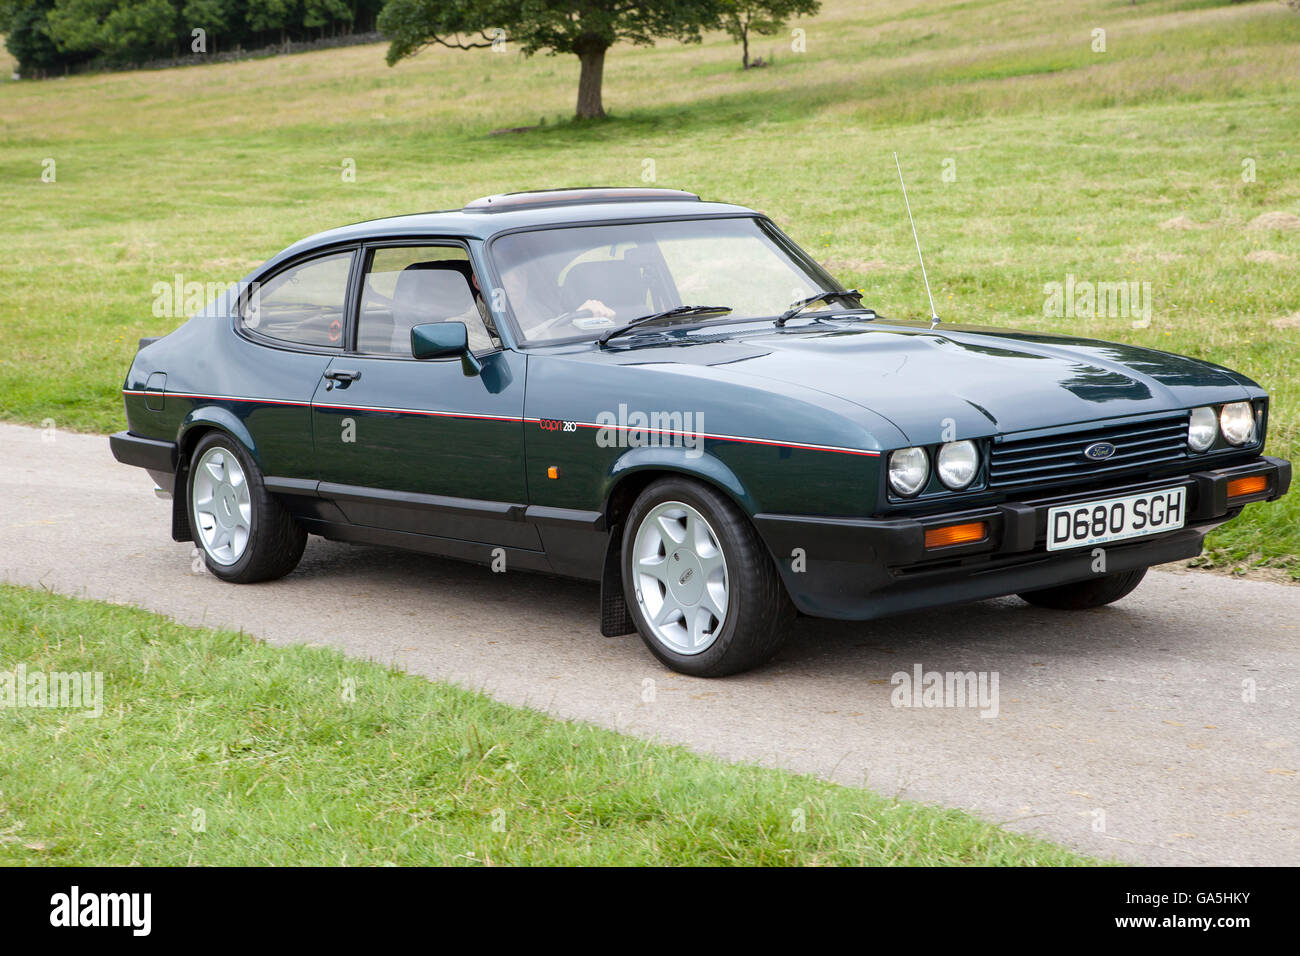 Green Ford Capri High Resolution Stock Photography and Images - Alamy